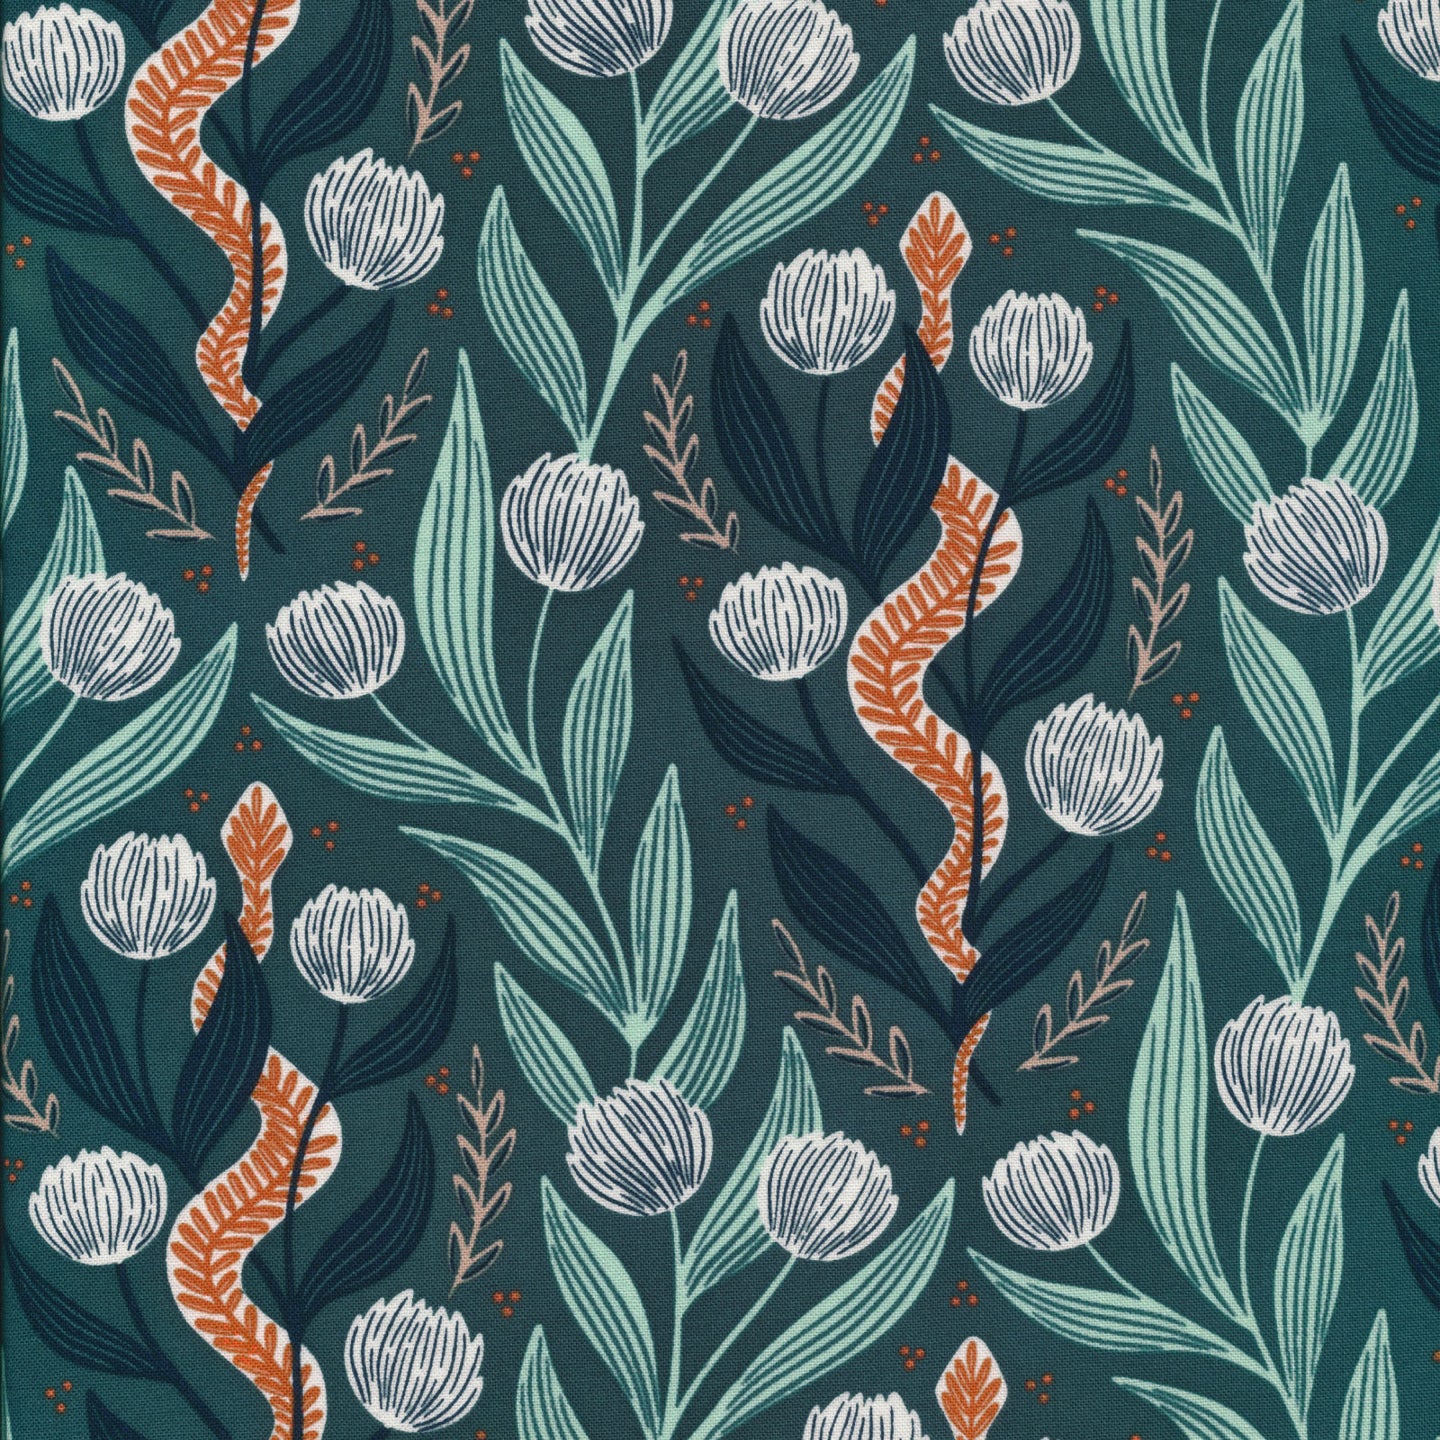 All That Wander by Juliana Tipton for Cloud 9 organic fabrics Hunter green background with poppy cream flowers and two toned rust and green leaves and stems high quality quilt weight cotton for quilting clothing garments bags sewing projects 